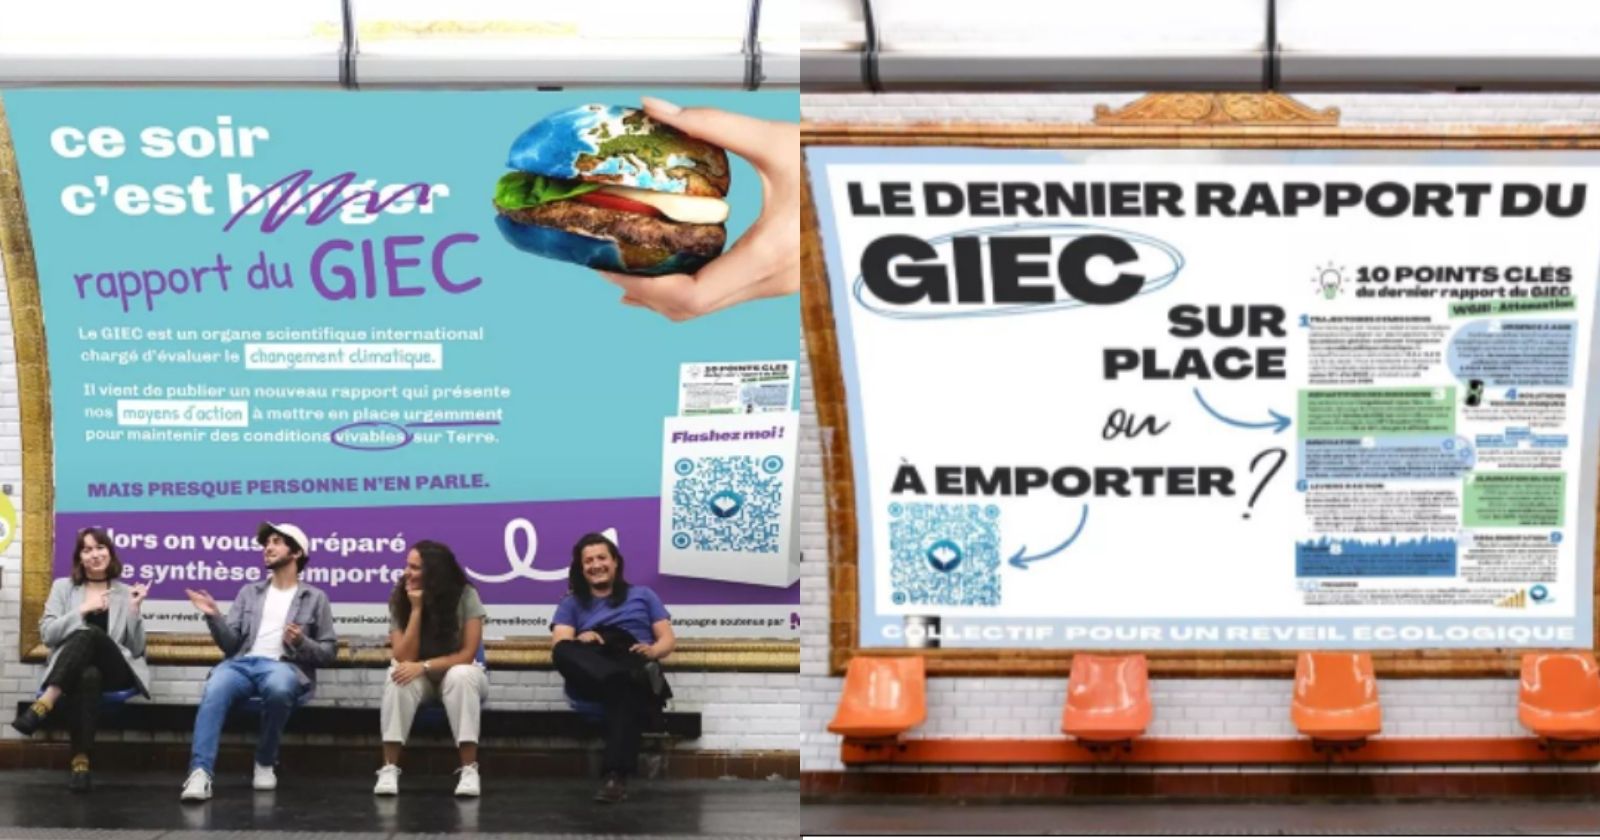 Throughout the week, the IPCC invites itself to 108 metro stations in Paris